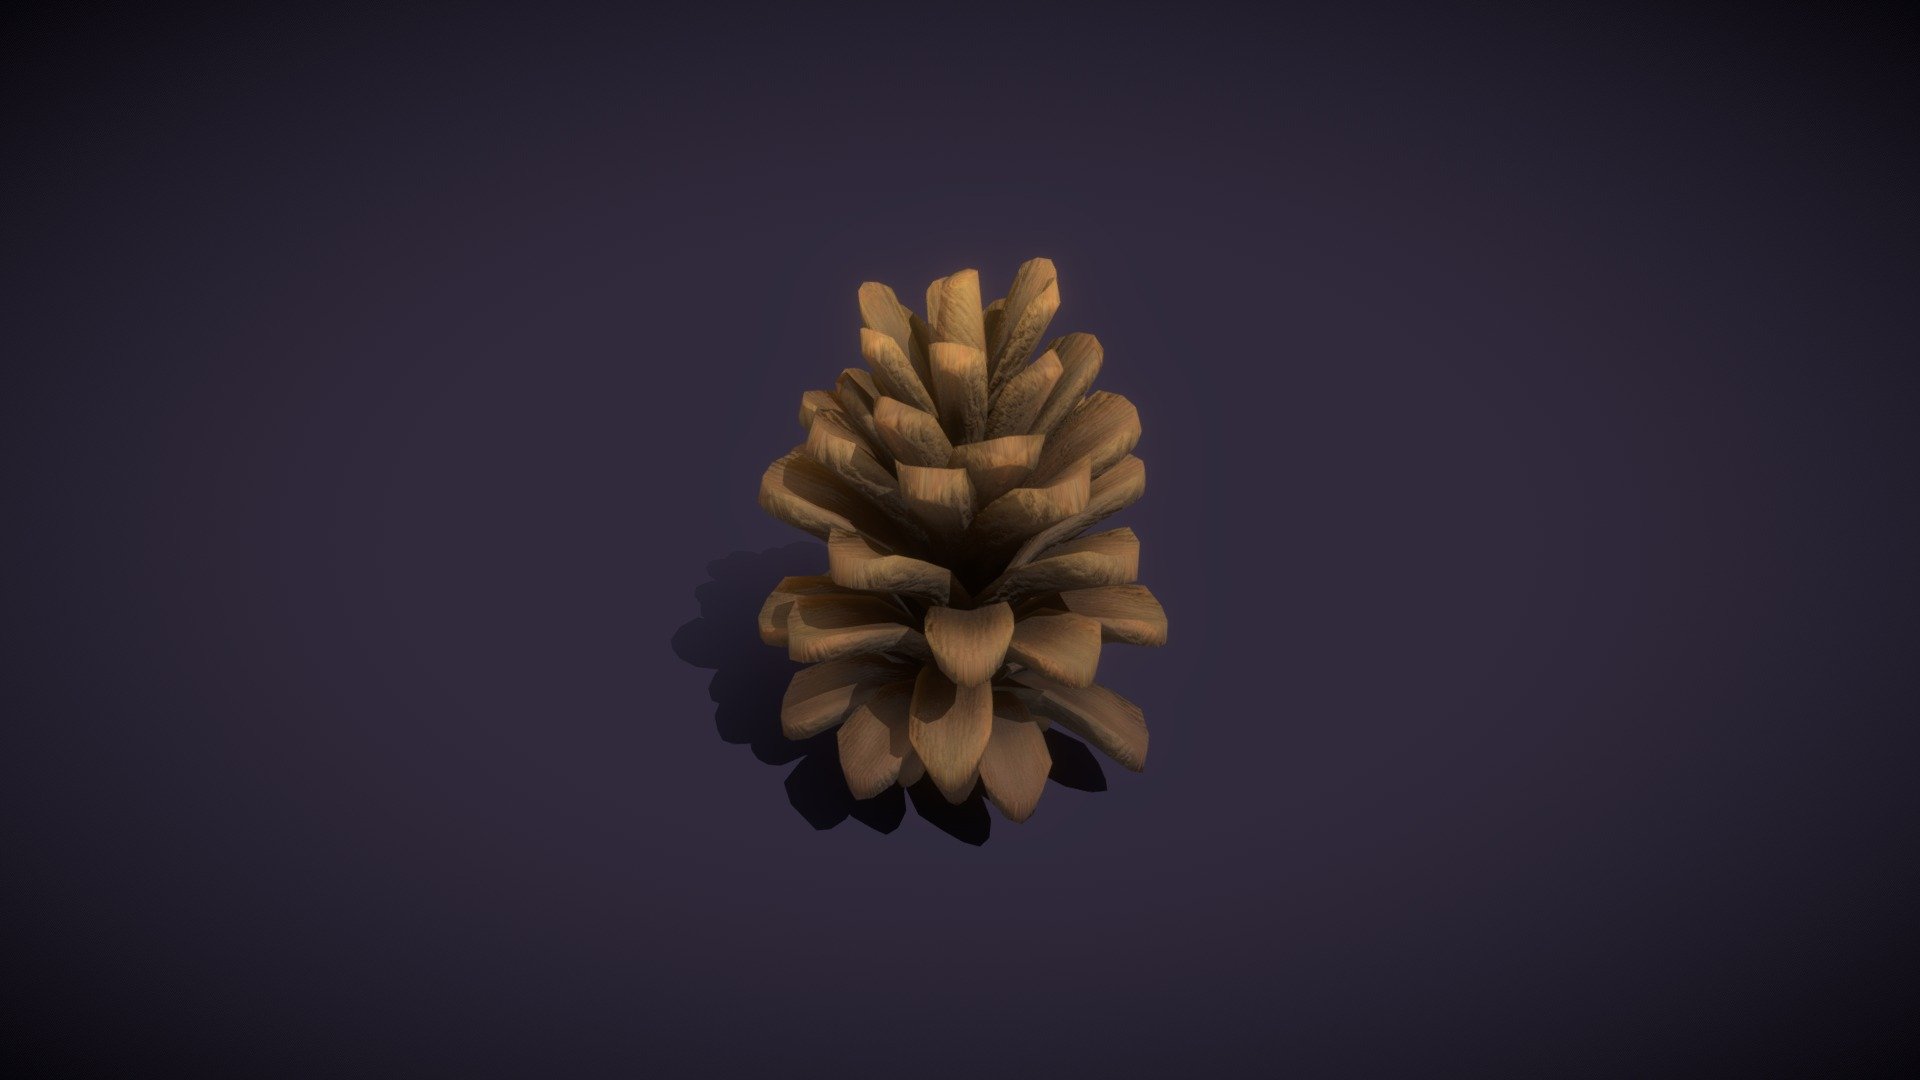 Cartoon Pine Cone 3D Model is completely ready to be used in your games, animations, films, designs etc.  

All textures and materials are included and mapped in every format. The model is completely ready for use visualization in any 3d software and engine.  

Technical details:  




File formats included in the package are: FBX, OBJ, GLB, ABC, DAE, PLY, STL, BLEND, gLTF (generated), USDZ (generated)

Native software file format: BLEND

Render engine: Eevee

Polygons: 2,336

Overall vertex count: 2,650

Textures: Color, Metallic, Roughness, Normal, AO.

All textures are 2k resolution.
 - Cartoon Pine Cone 3D Model - Buy Royalty Free 3D model by 3DDisco 3d model